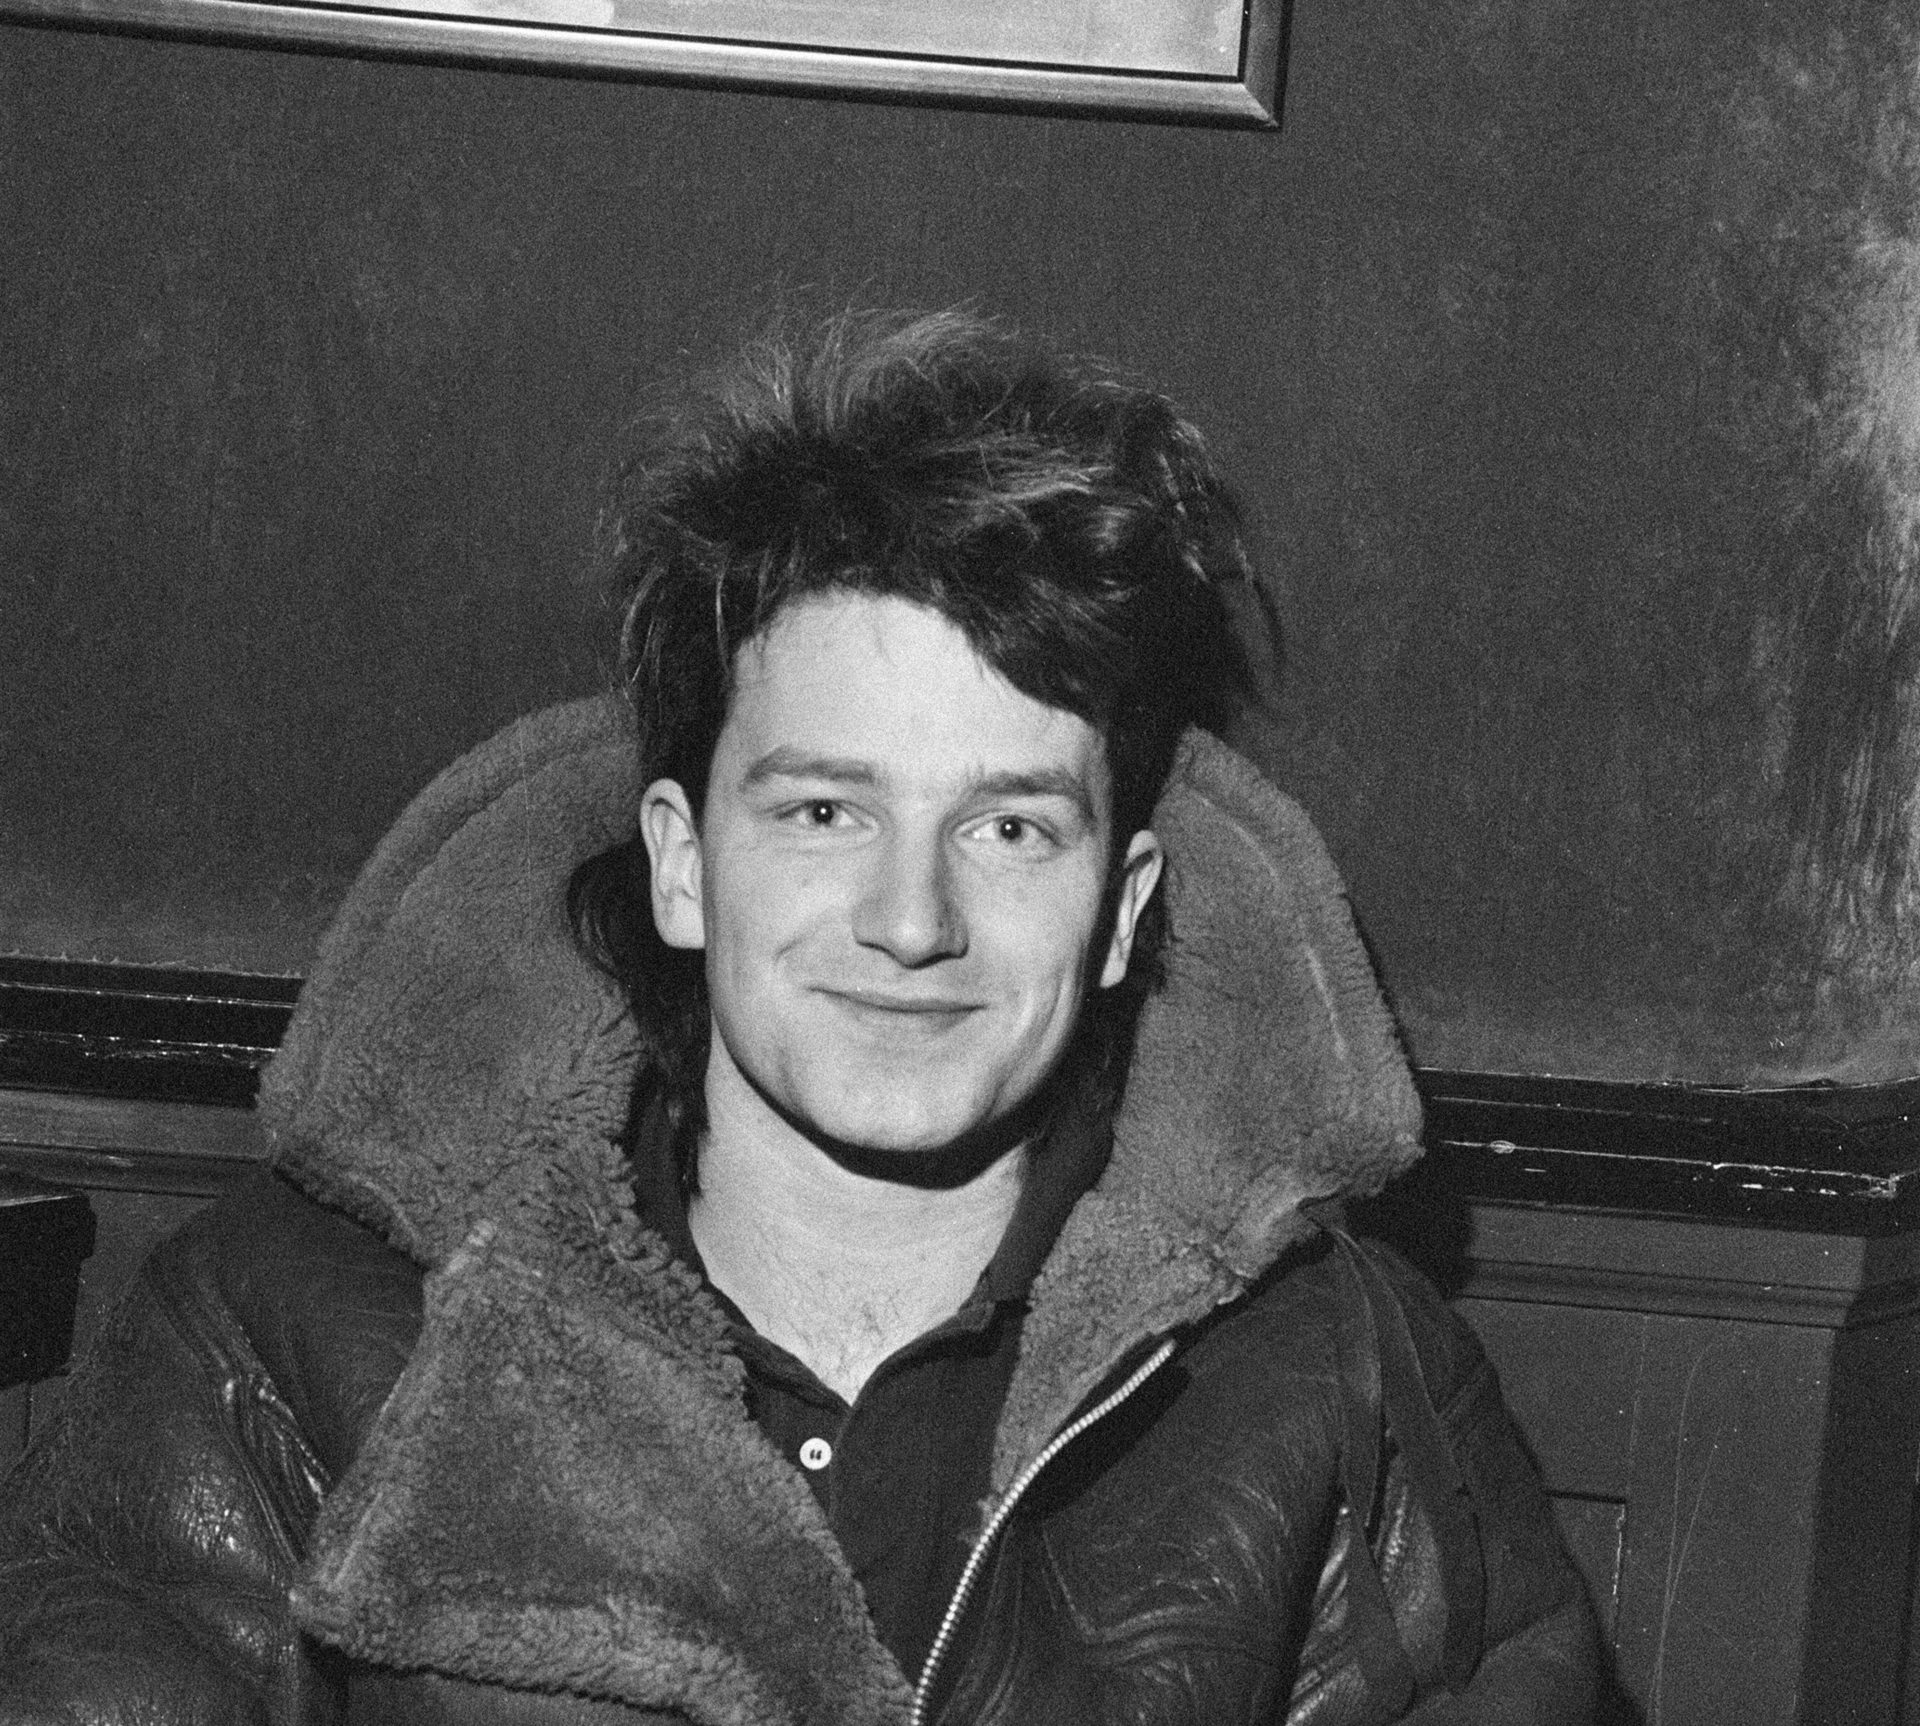 Bono is seen during an informal press conference ahead of concert in Glasgow, Scotland in March 1983.